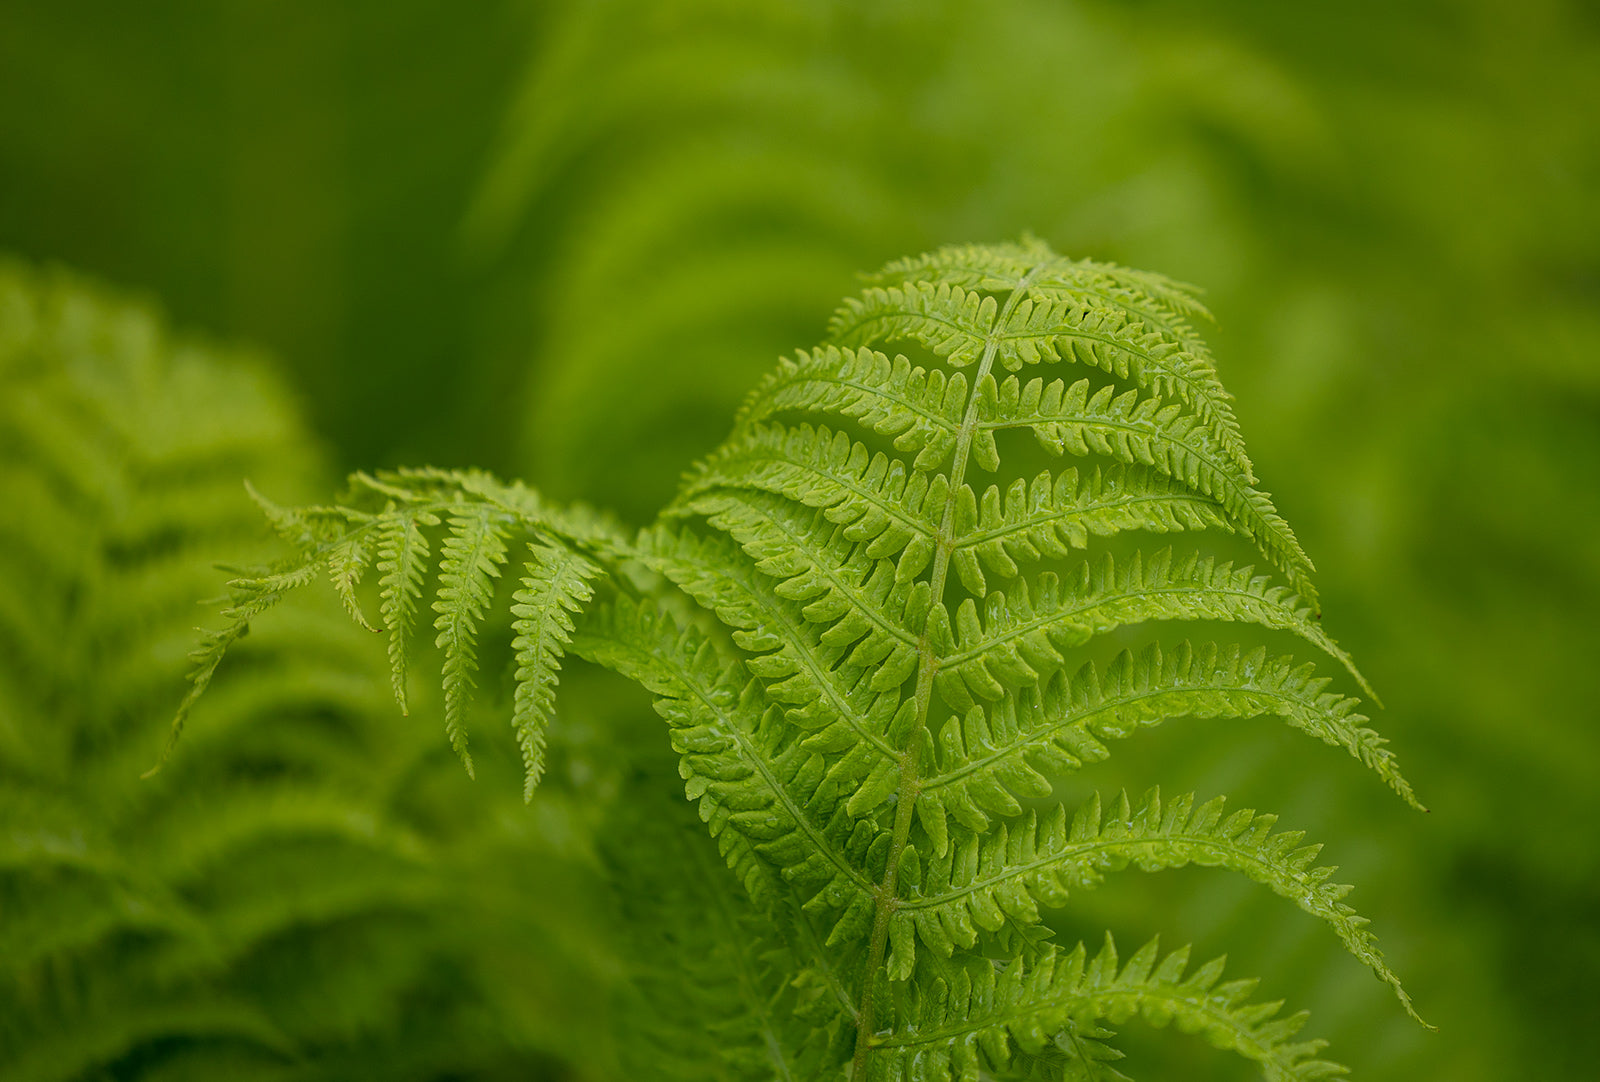 Green ferns with a green blurred background